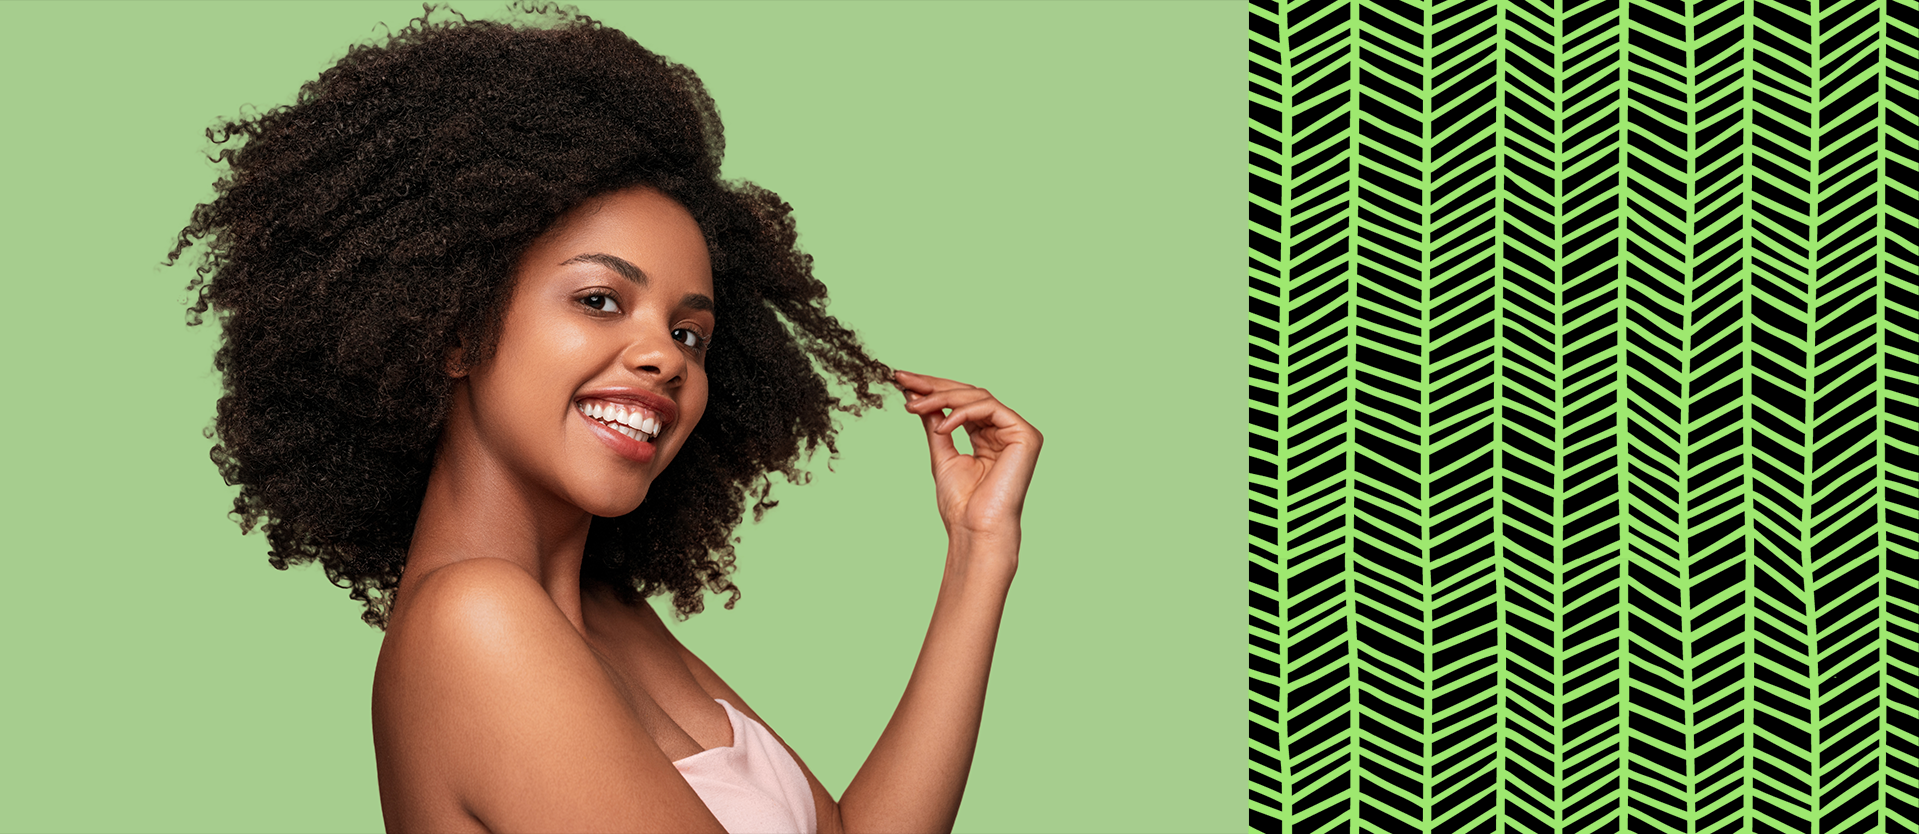 Side view of positive African American female model smiling for camera and touching clean curly hair after hygienic routine against brown background